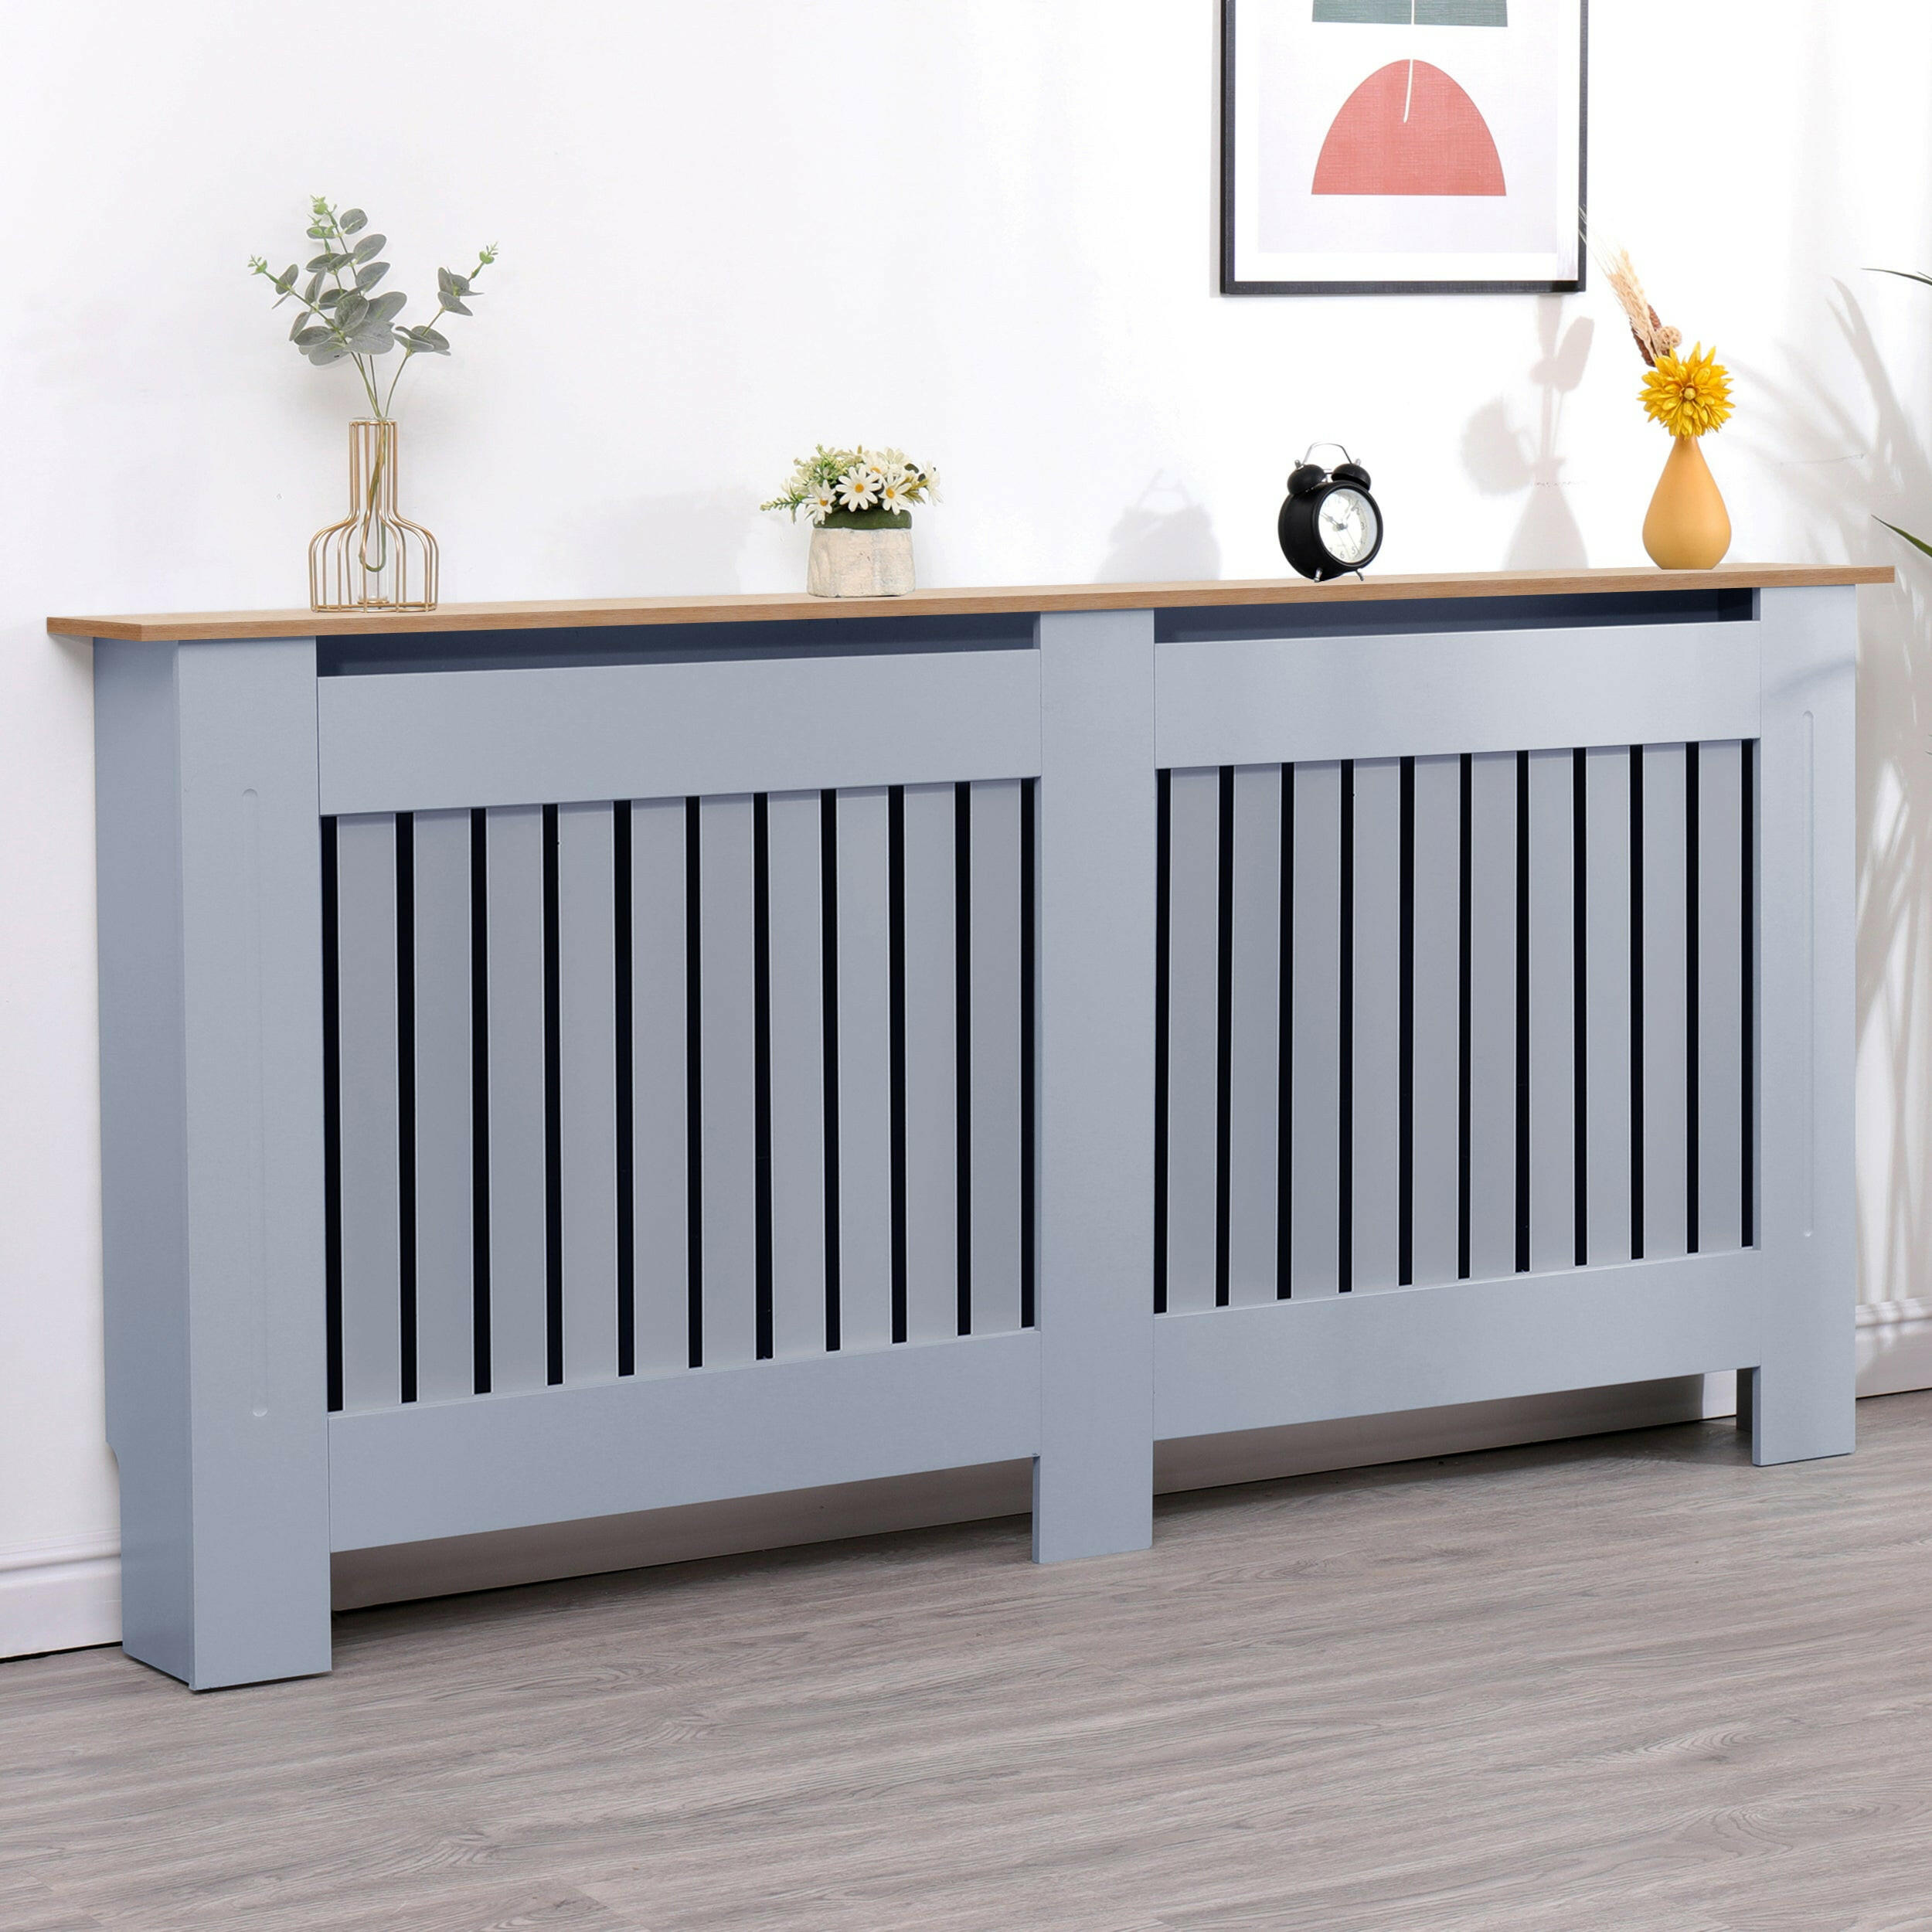 Radiator cover with shelves